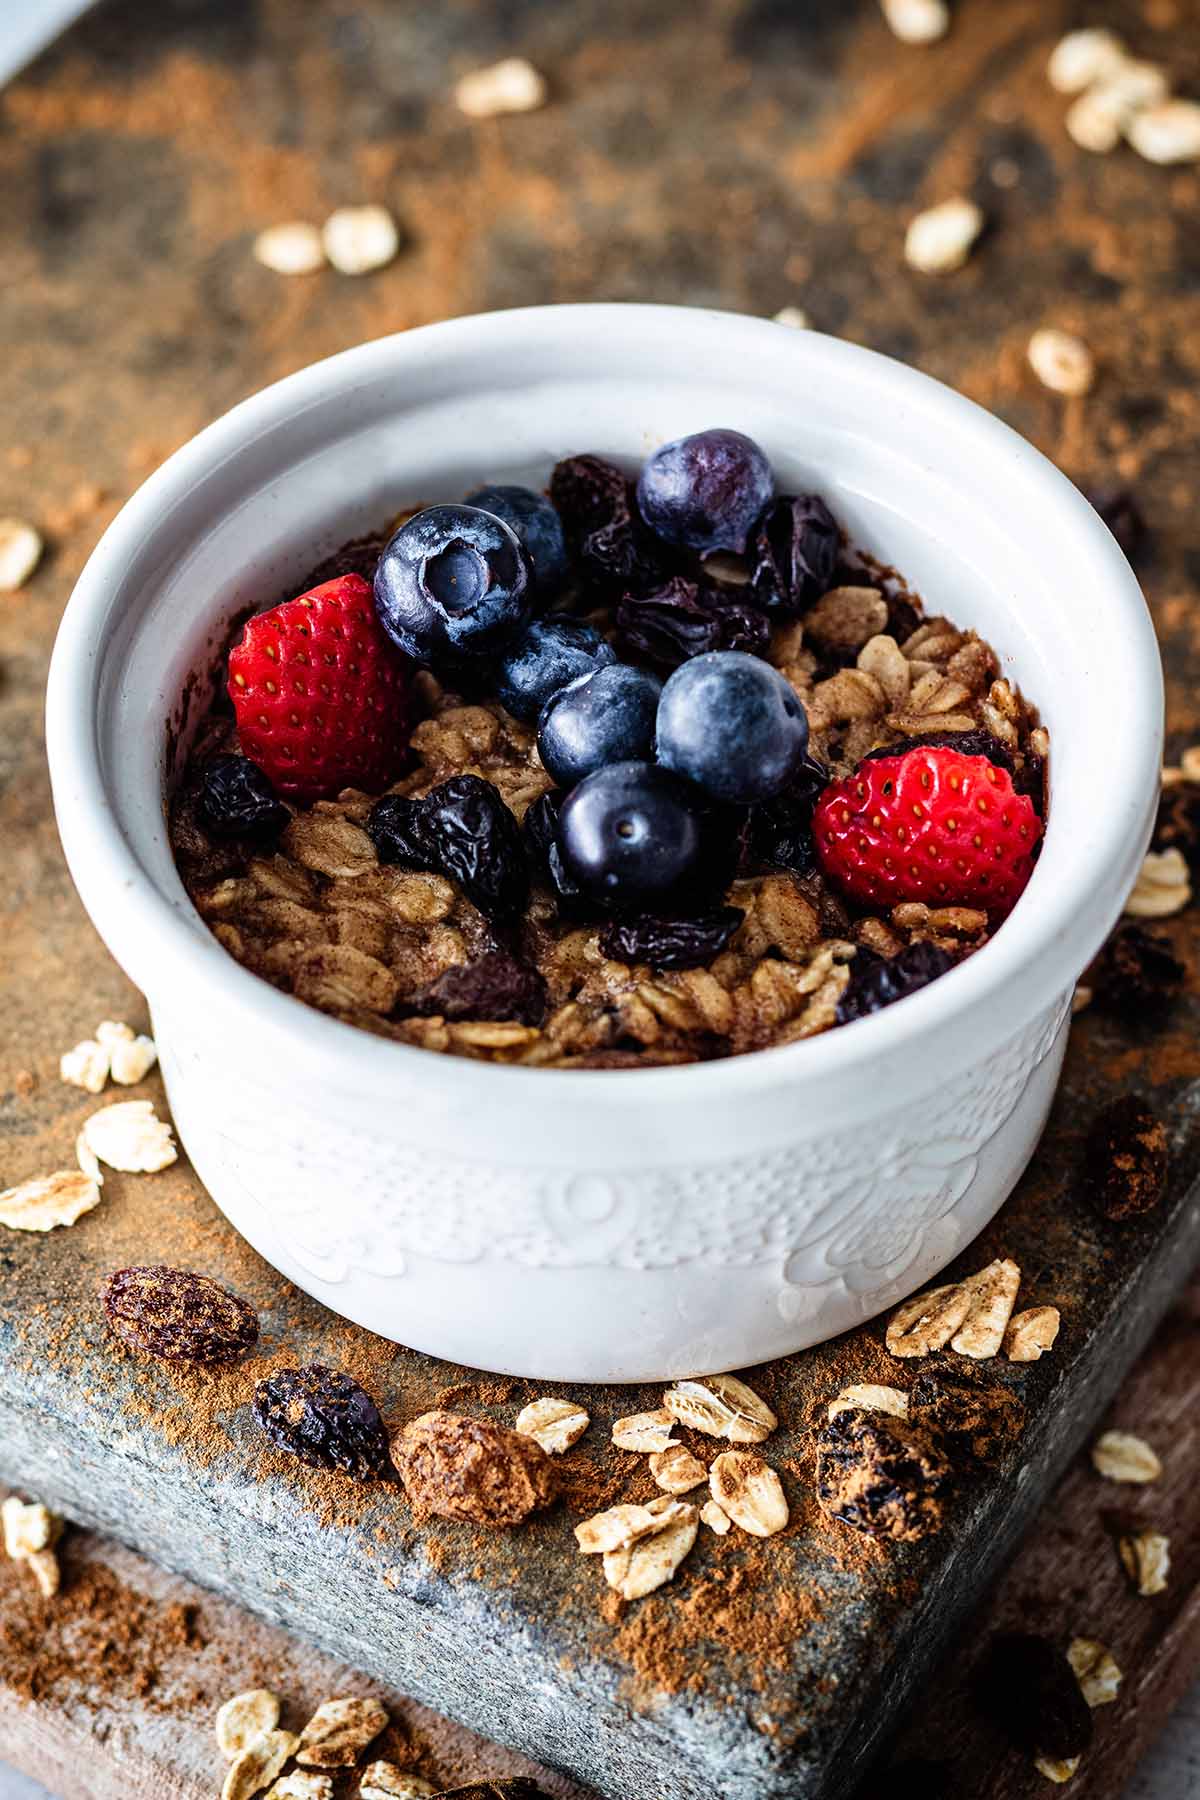 Single serving baked oatmeal topped with sliced strawberries and fresh blueberries in a white ceramic ramekin.